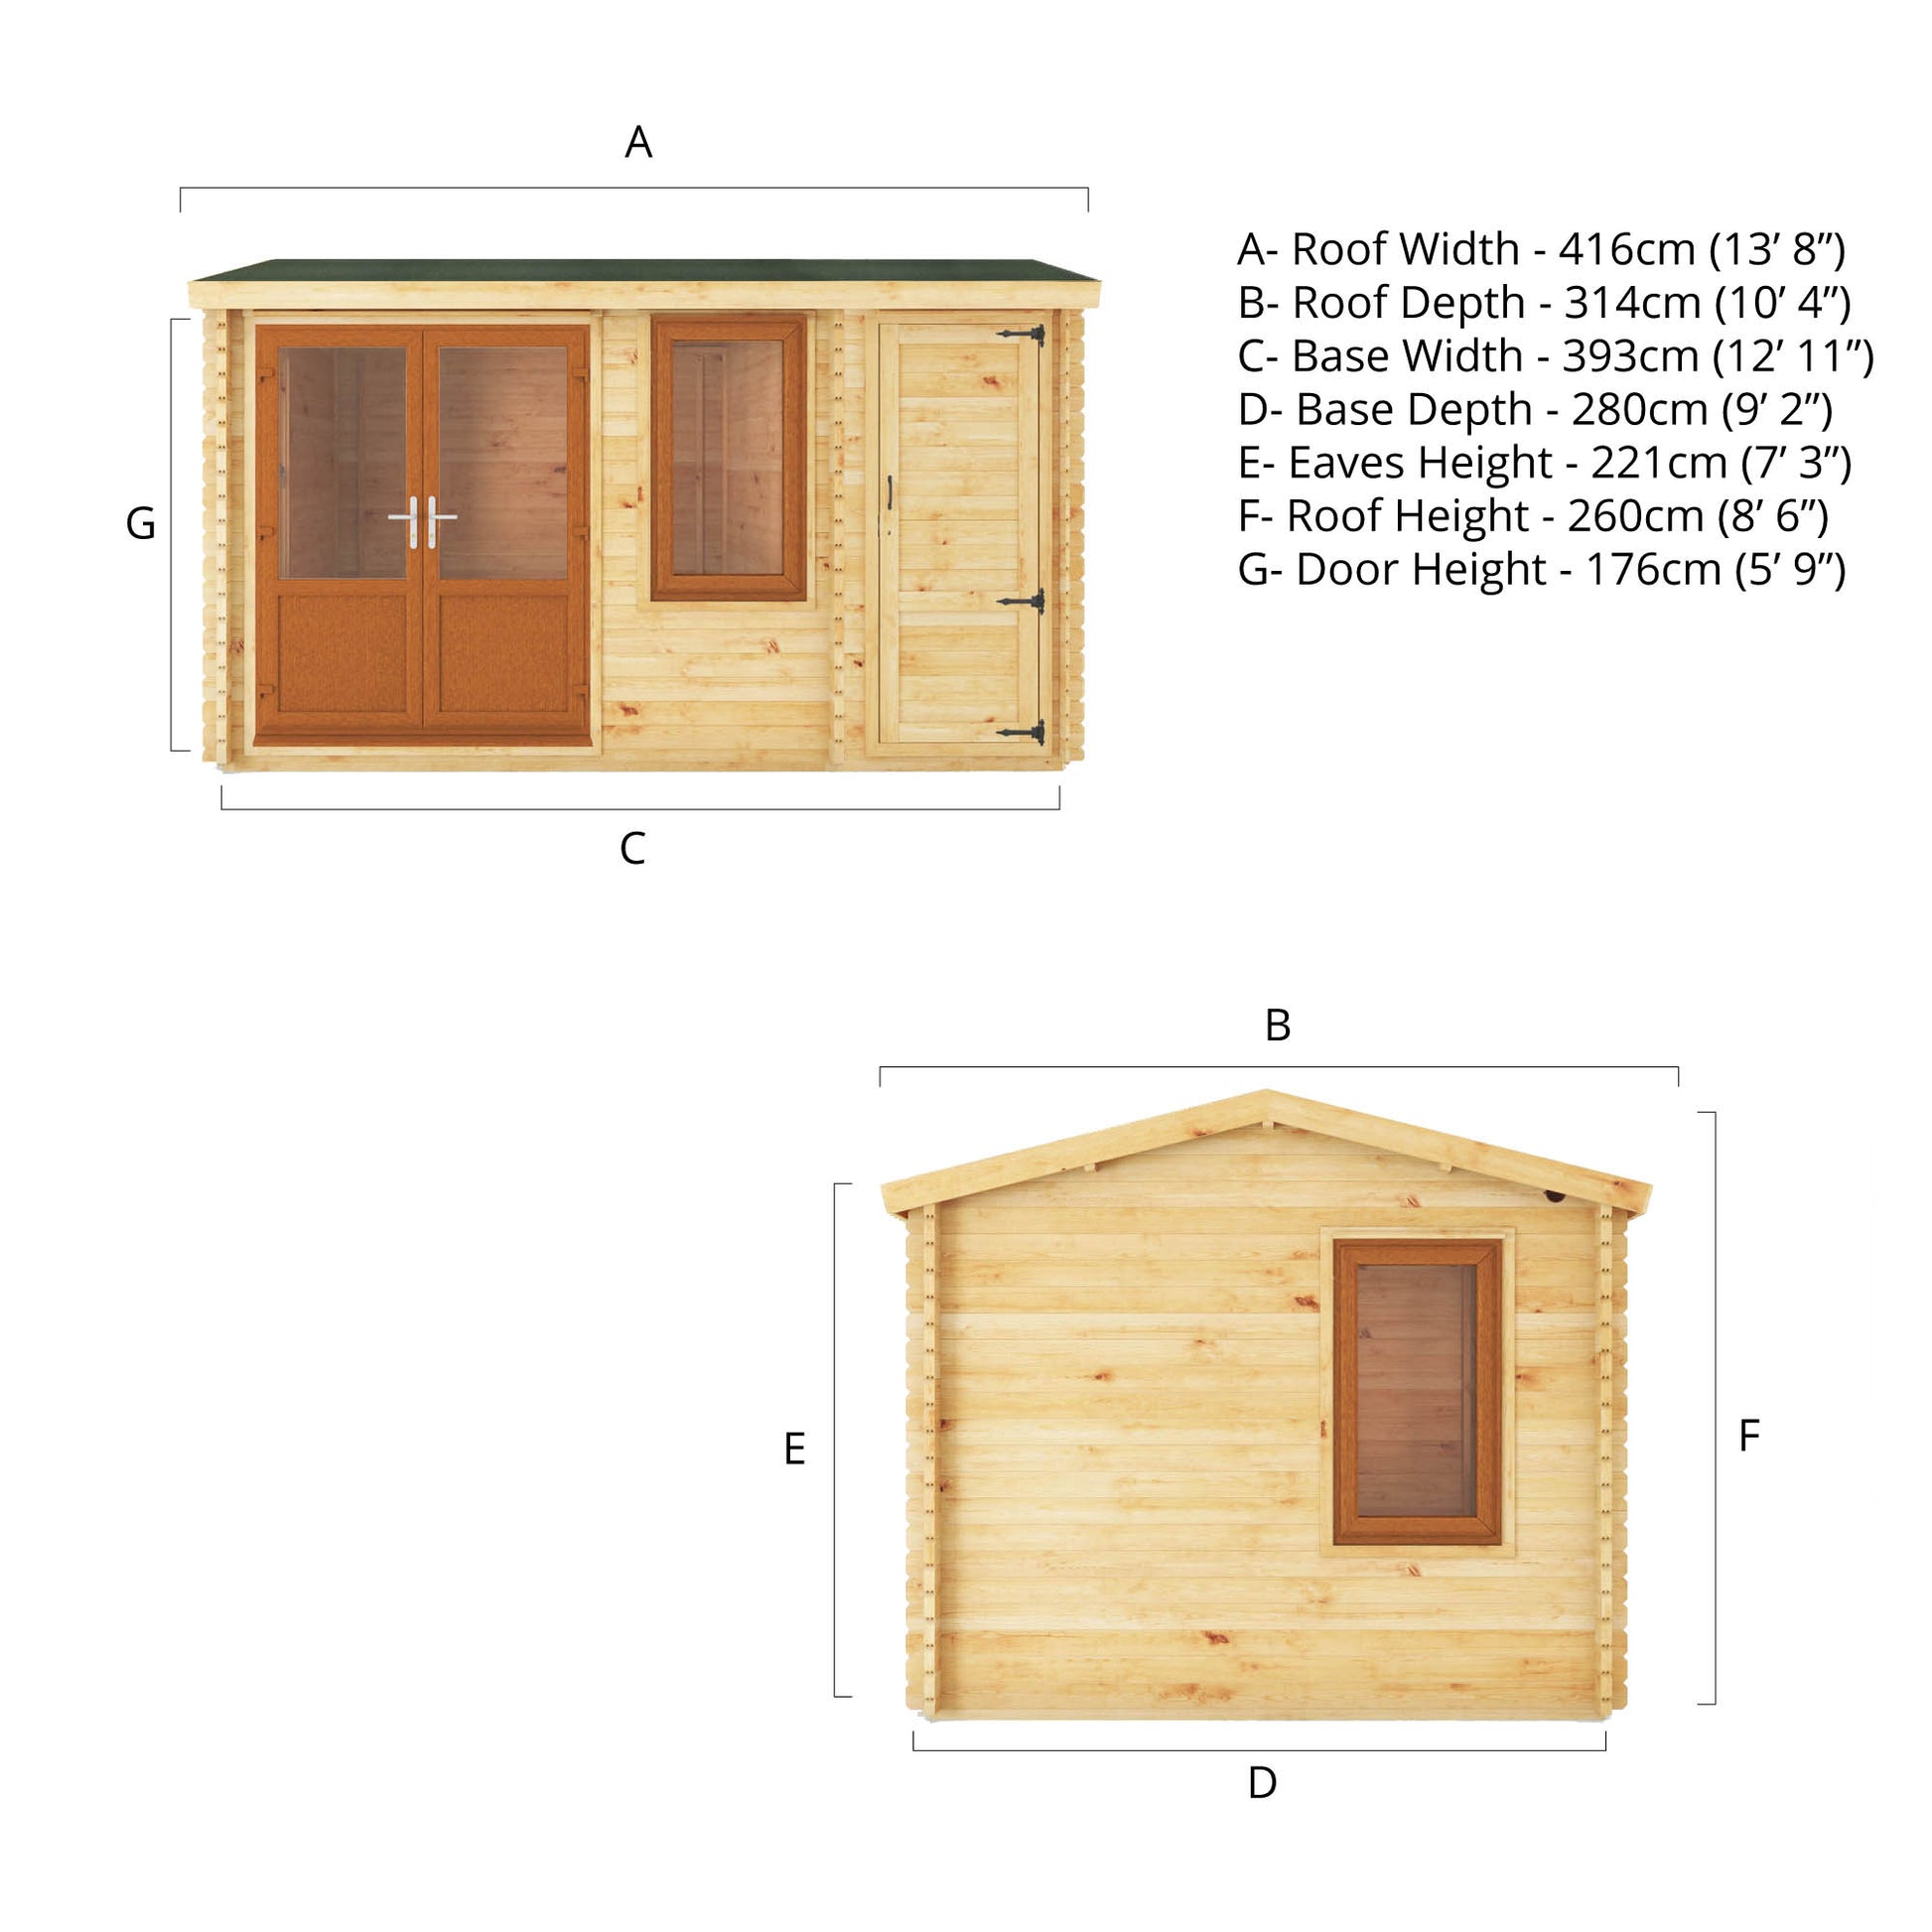 Dimensions of a timber log cabin with double doors, apex roof, side shed and large windows with oak UPVC